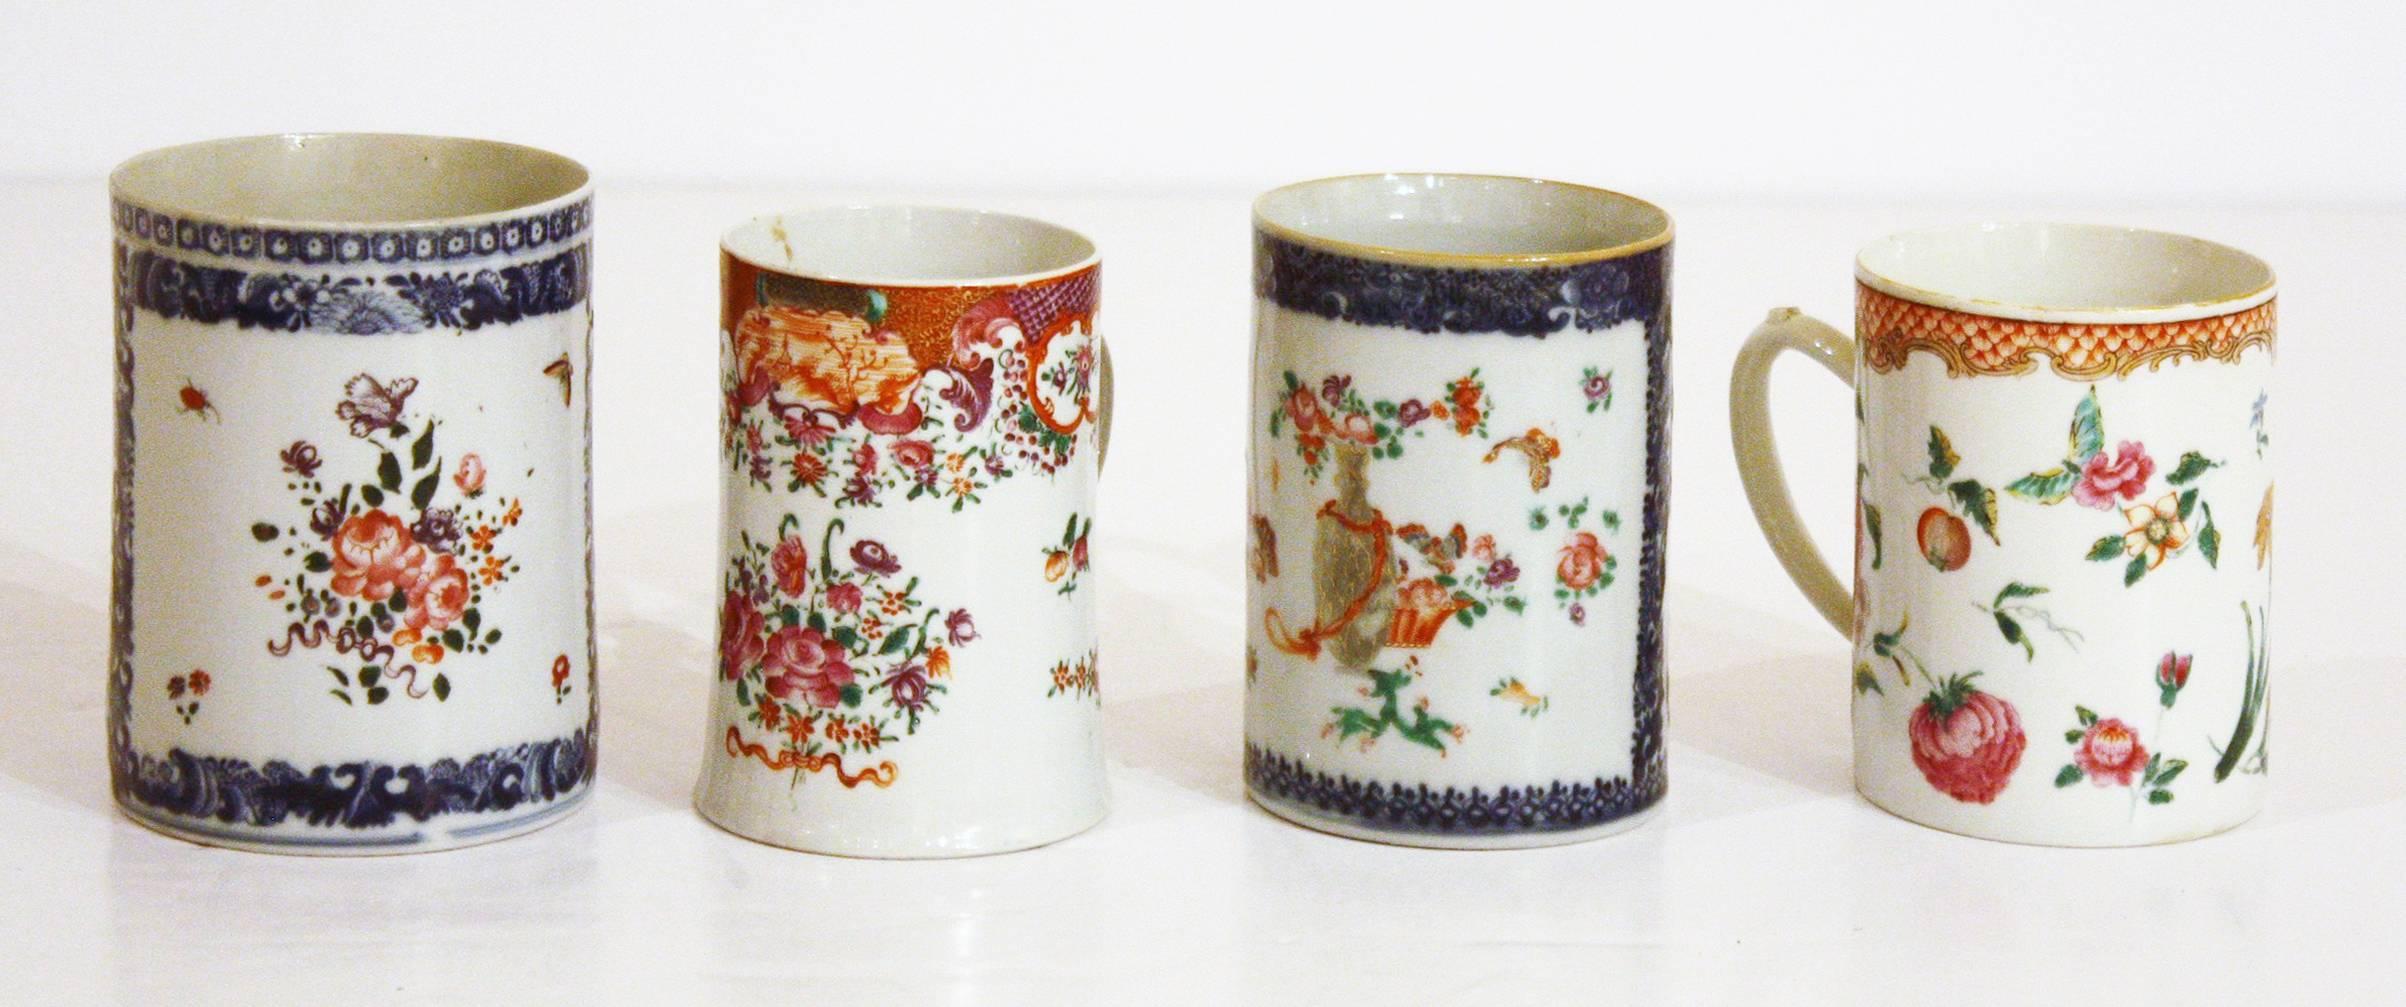 Hand-Painted Late 18th-Early 19th Century Chinese Export Mugs, Tankards